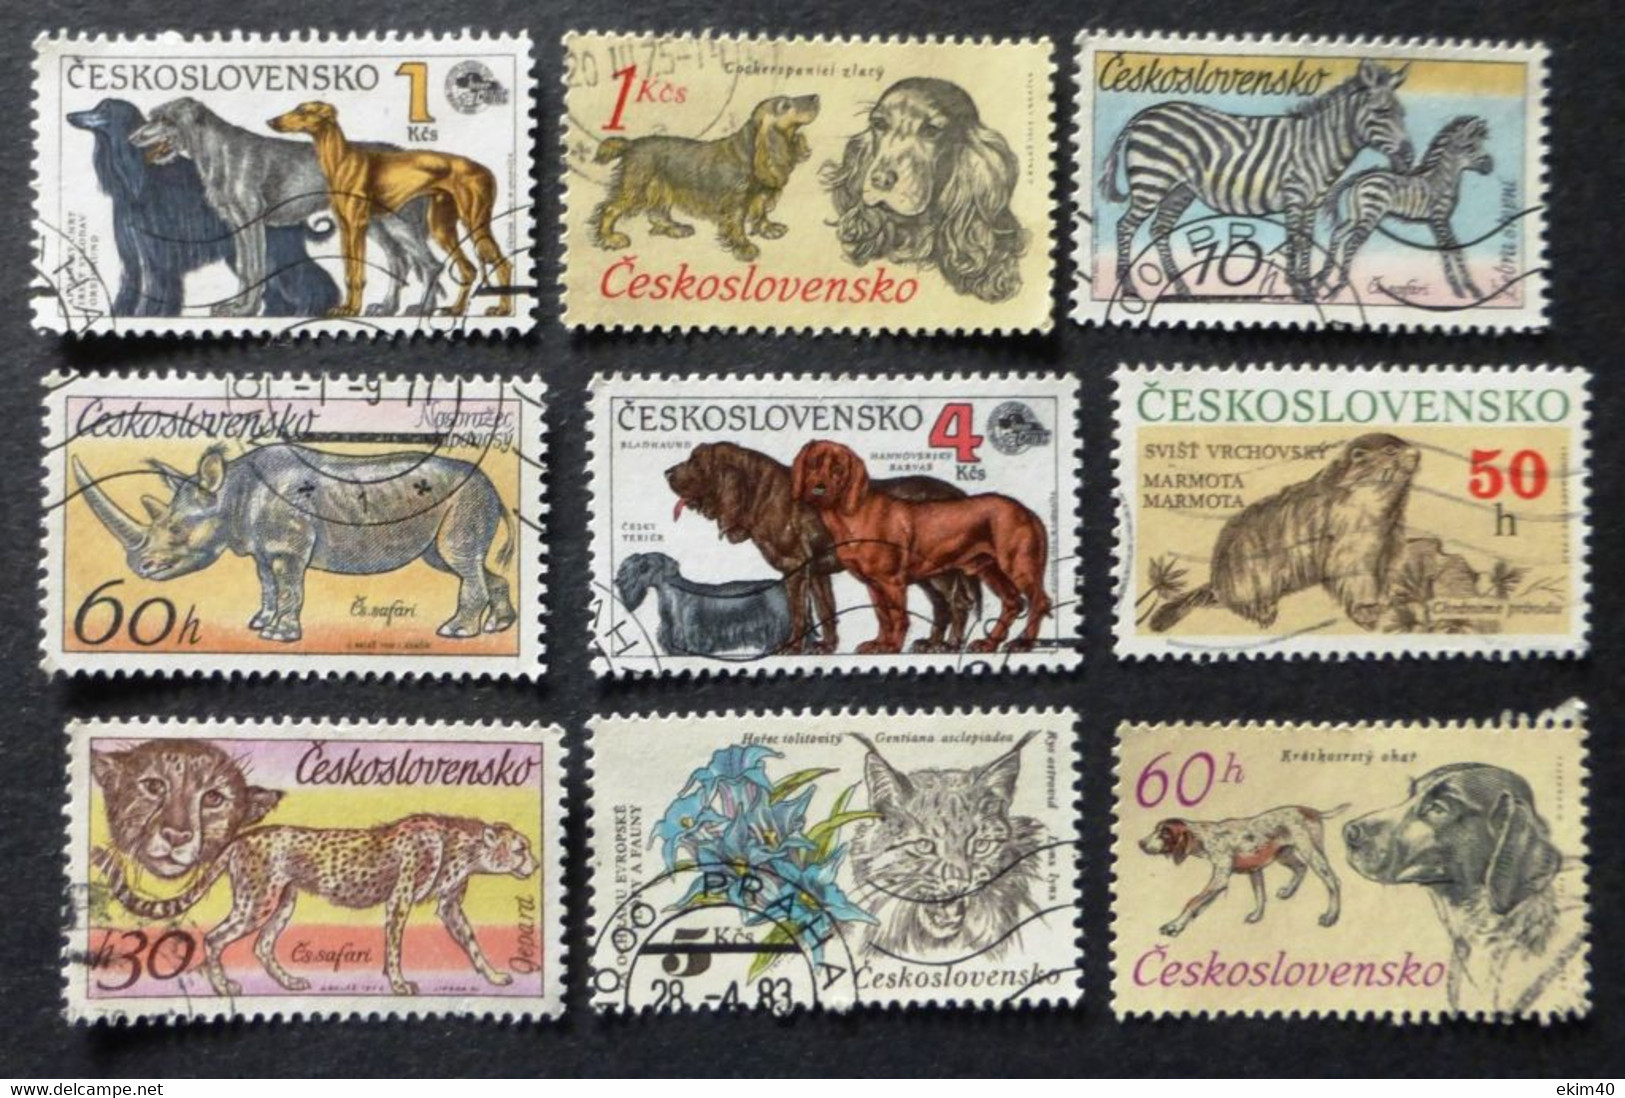 Selection Of Used/Cancelled Stamps From Czechoslovakia Wild & Domestic Animals. No DC-320 - Gebruikt